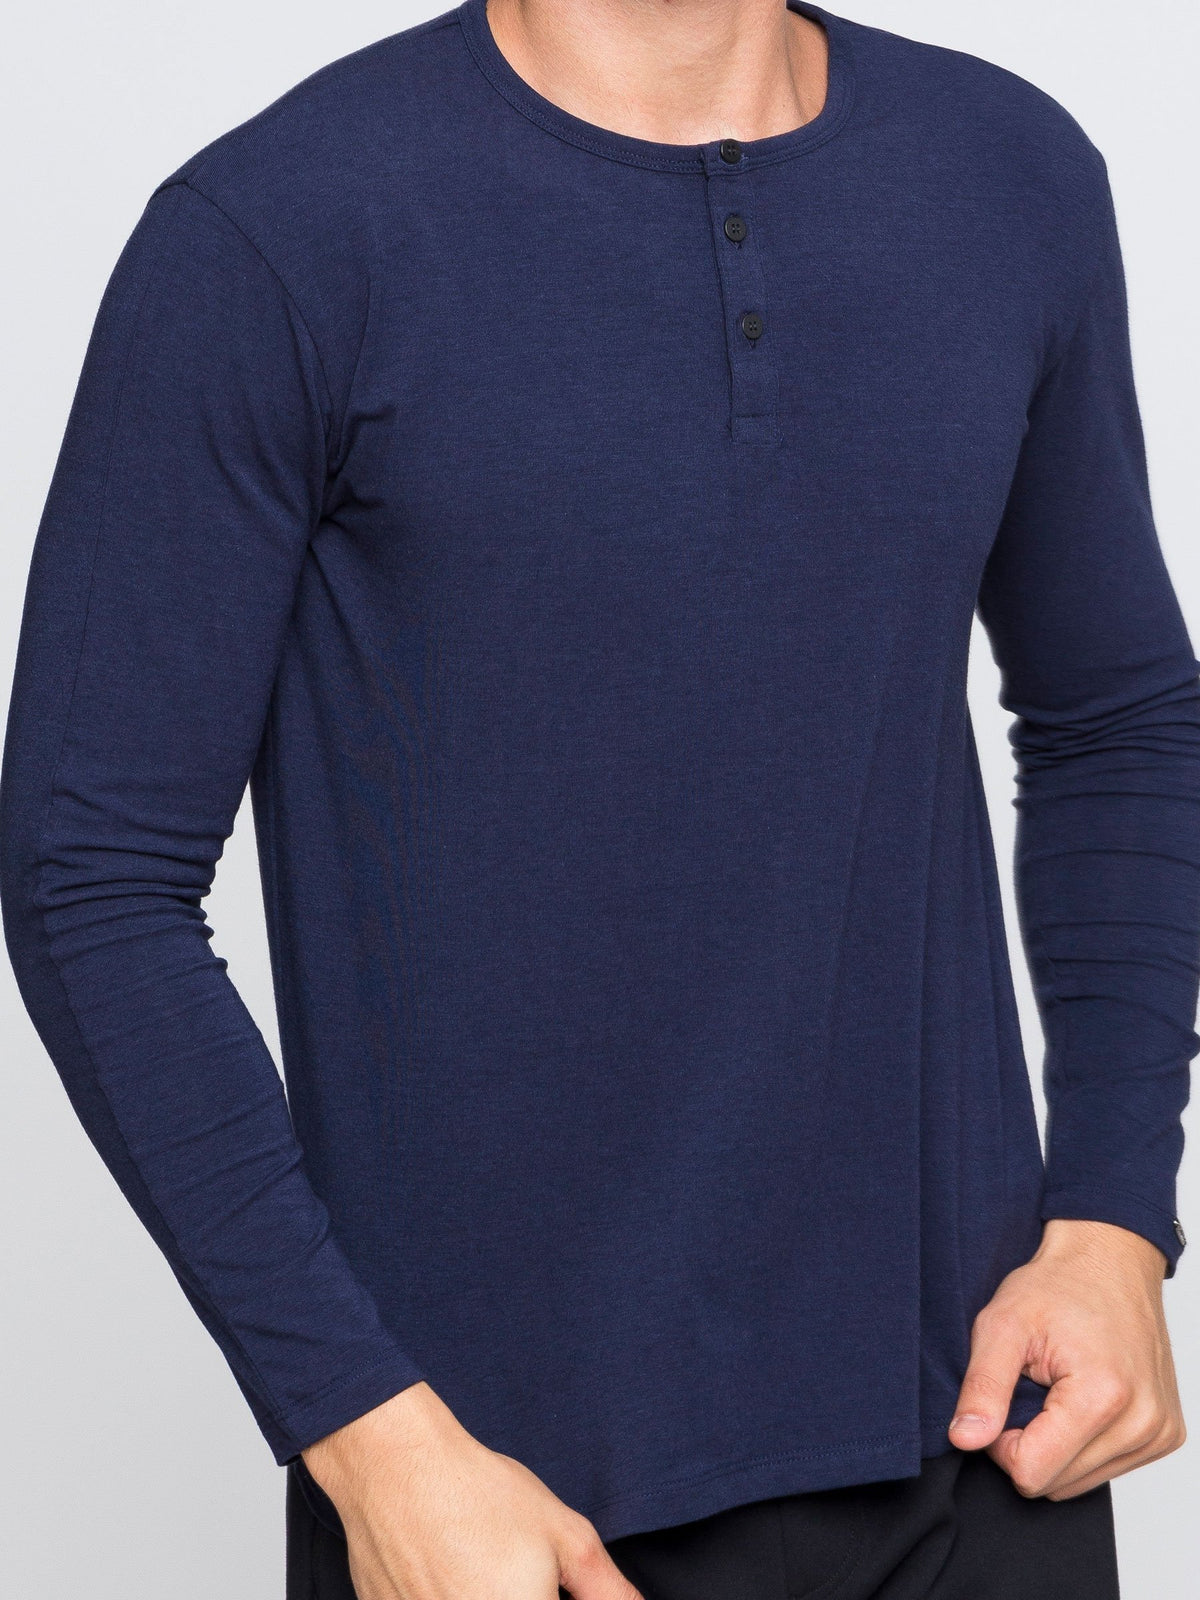 Two Blind Brothers - Mens Men's Long Sleeve Henley Navy